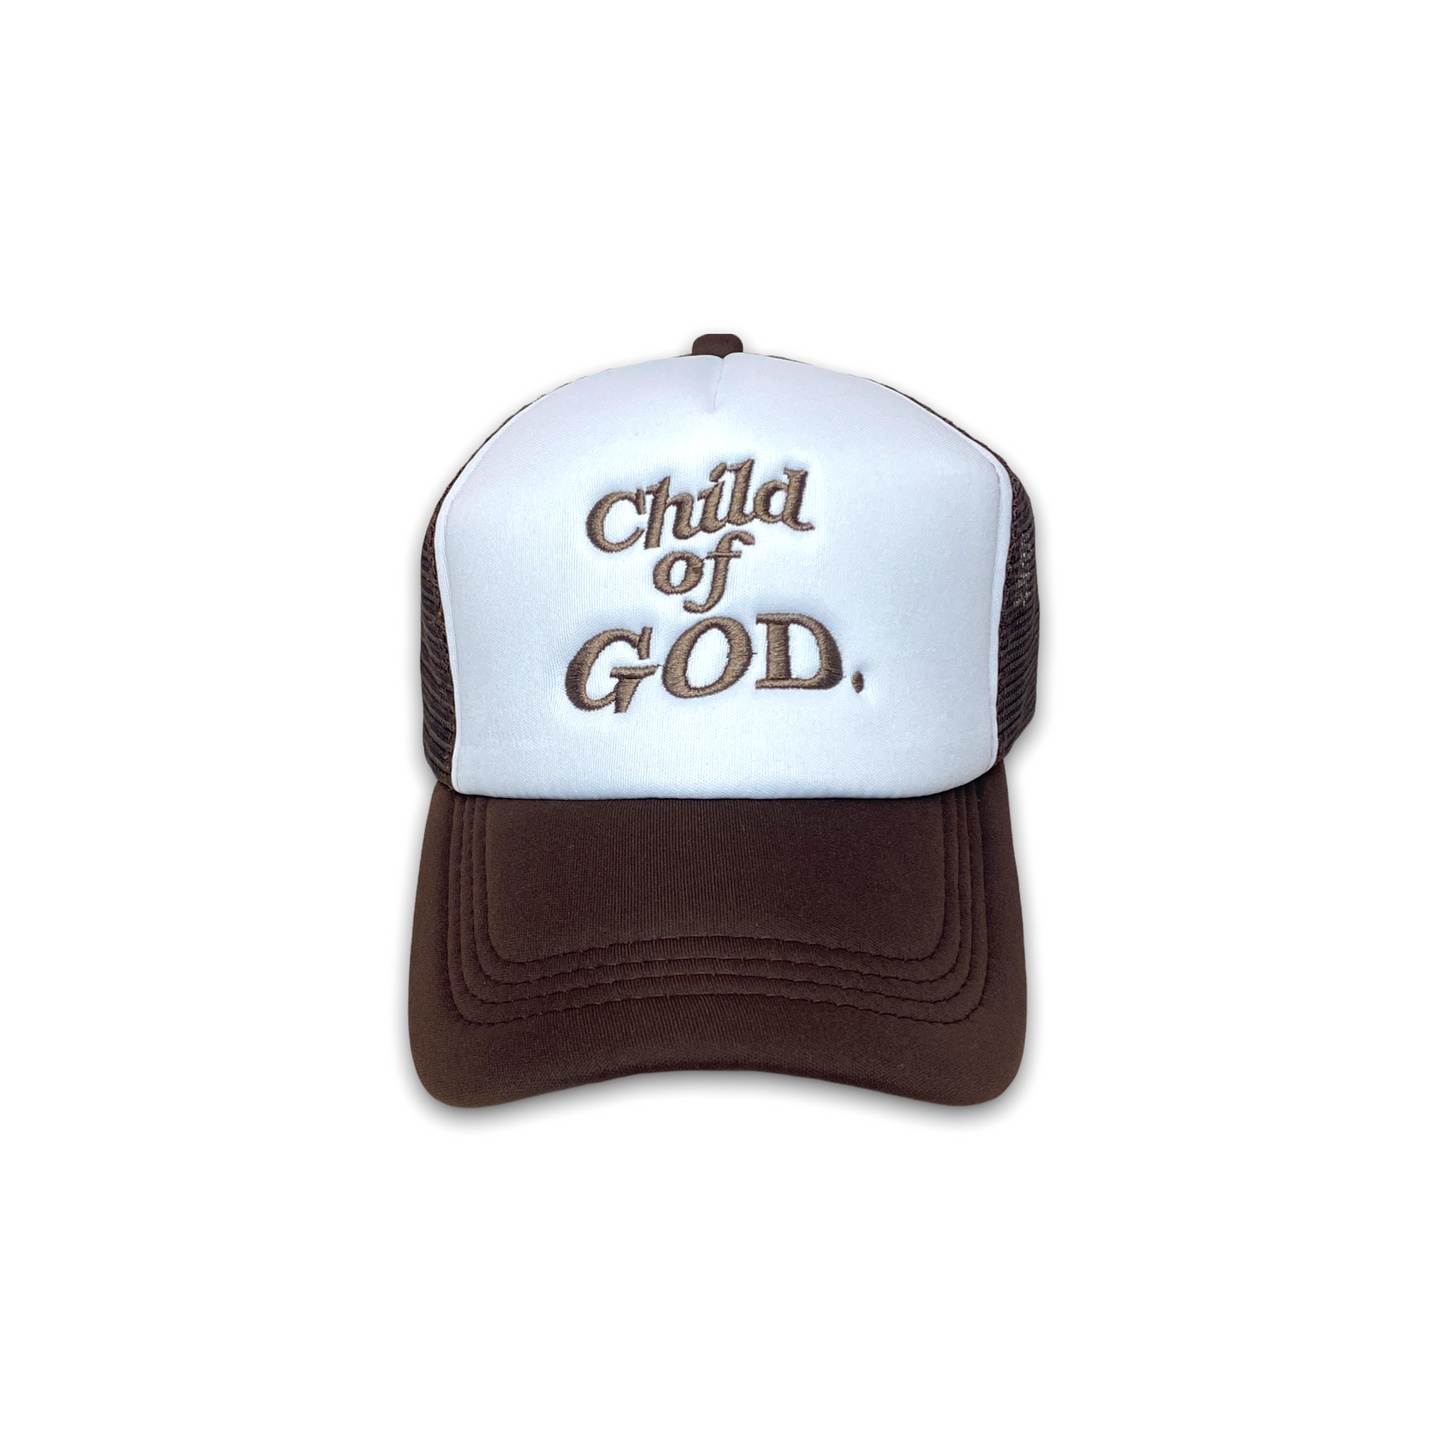 THE "CHILD OF GOD" BROWN TRUCKER